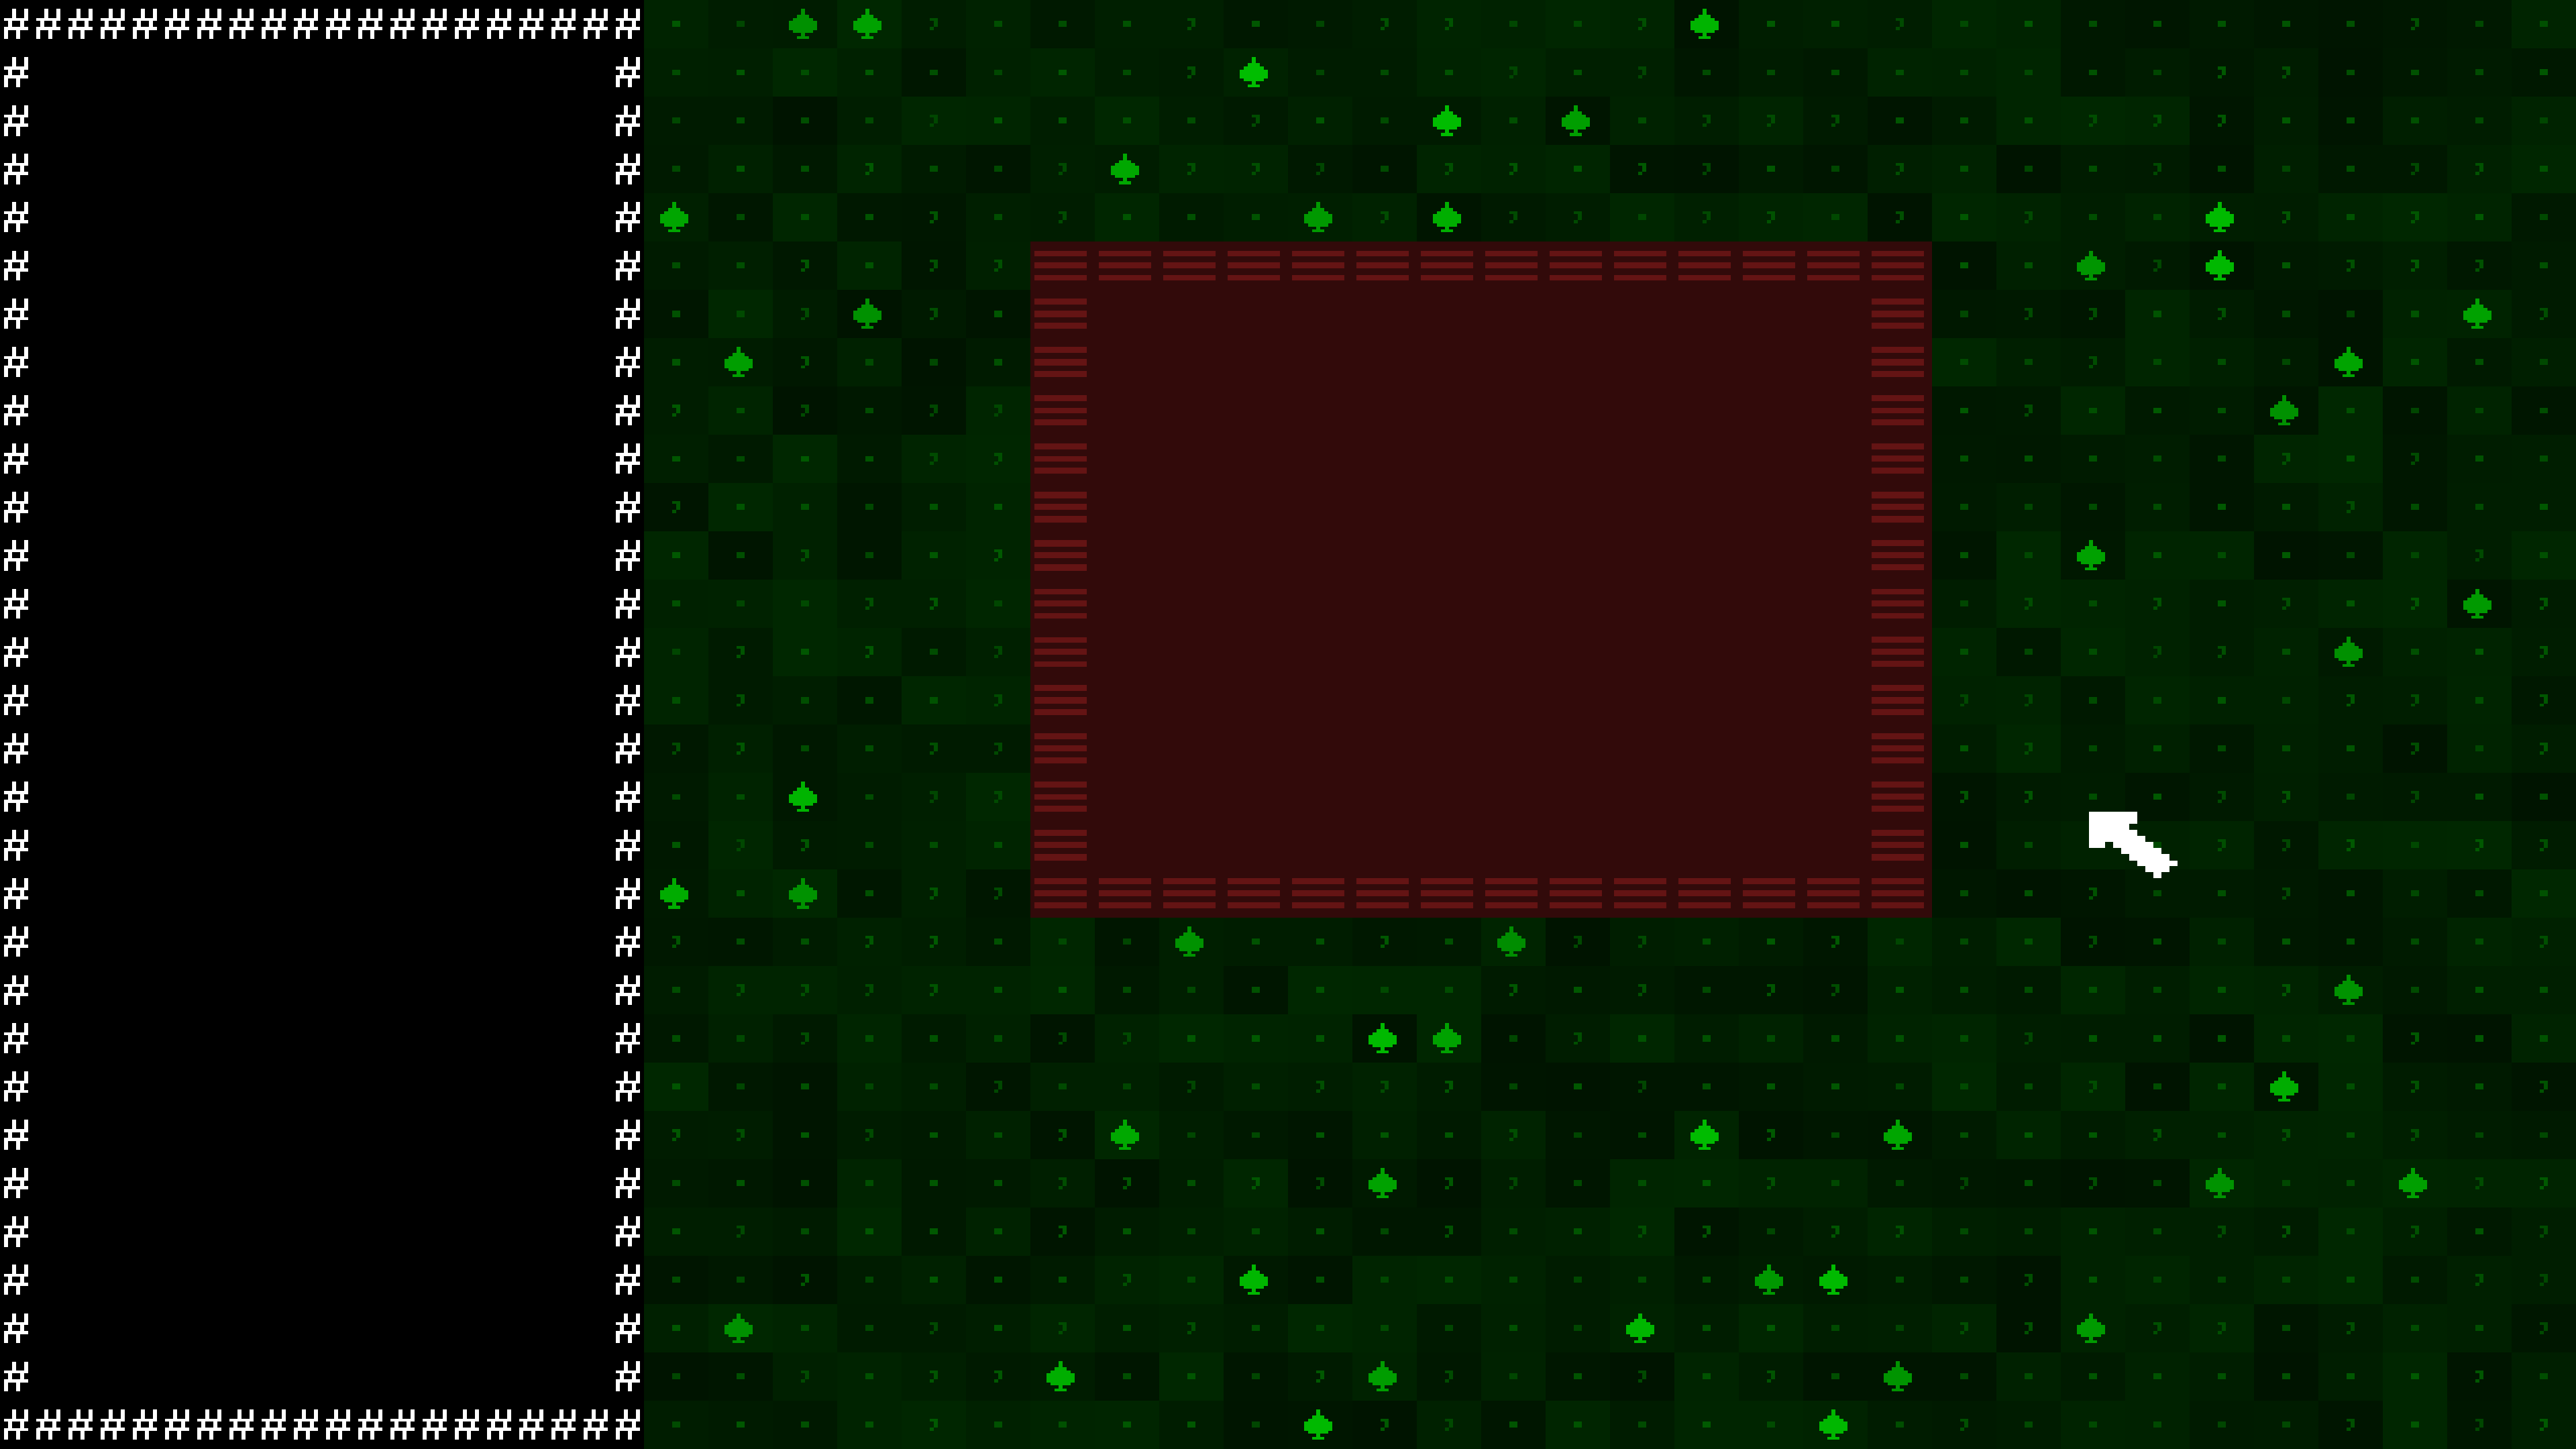 Example usage of GlyphTileMap showing a basic roguelike game UI